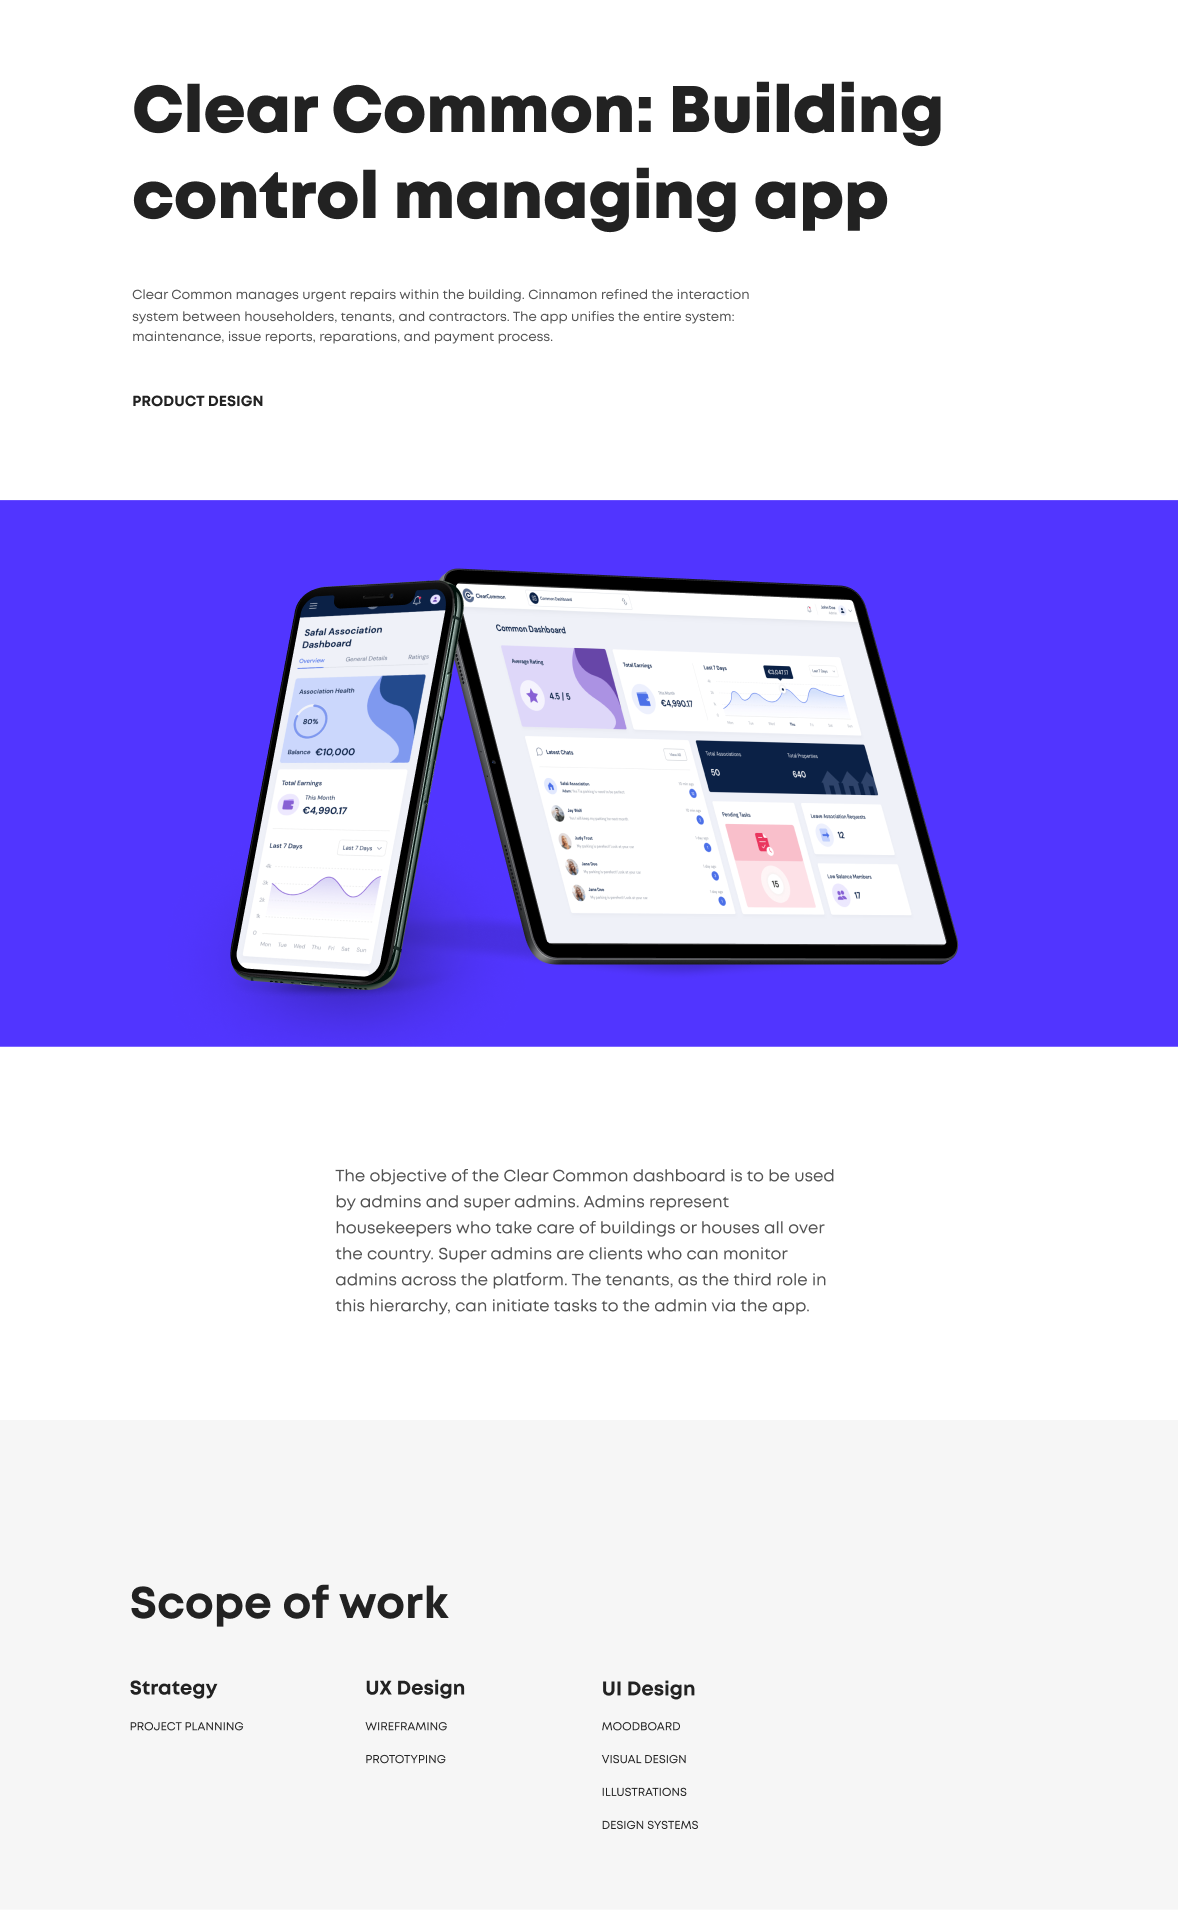 UX and UI design for the mobile app and the dashboard for managing buildings